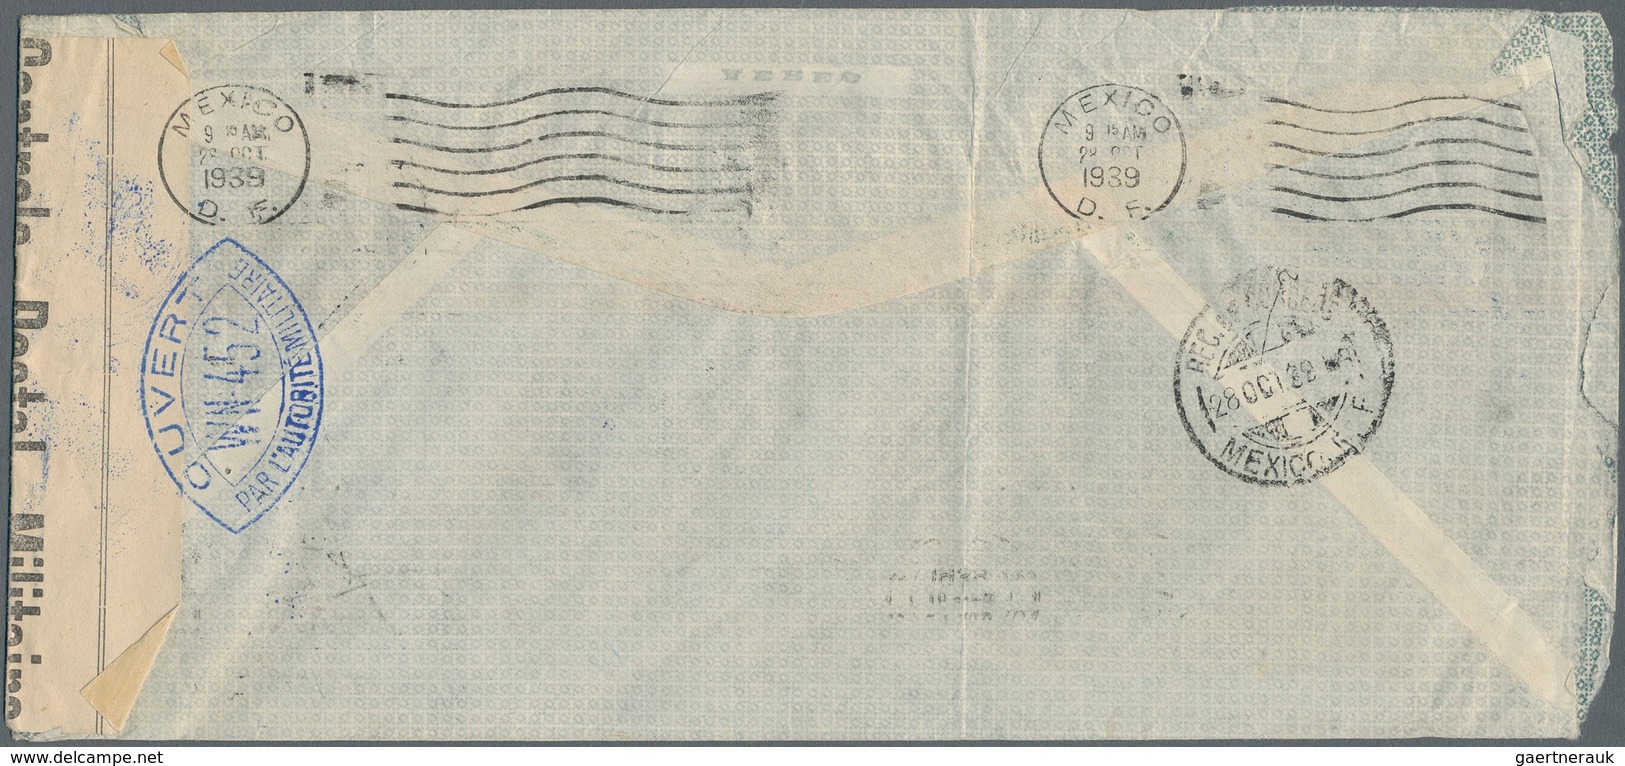 Mexiko: 1939, Airmail Cover From "MEXICO 24.AUG 39" To Nuremberg/Germany. The Airmail Route To Germa - Mexico